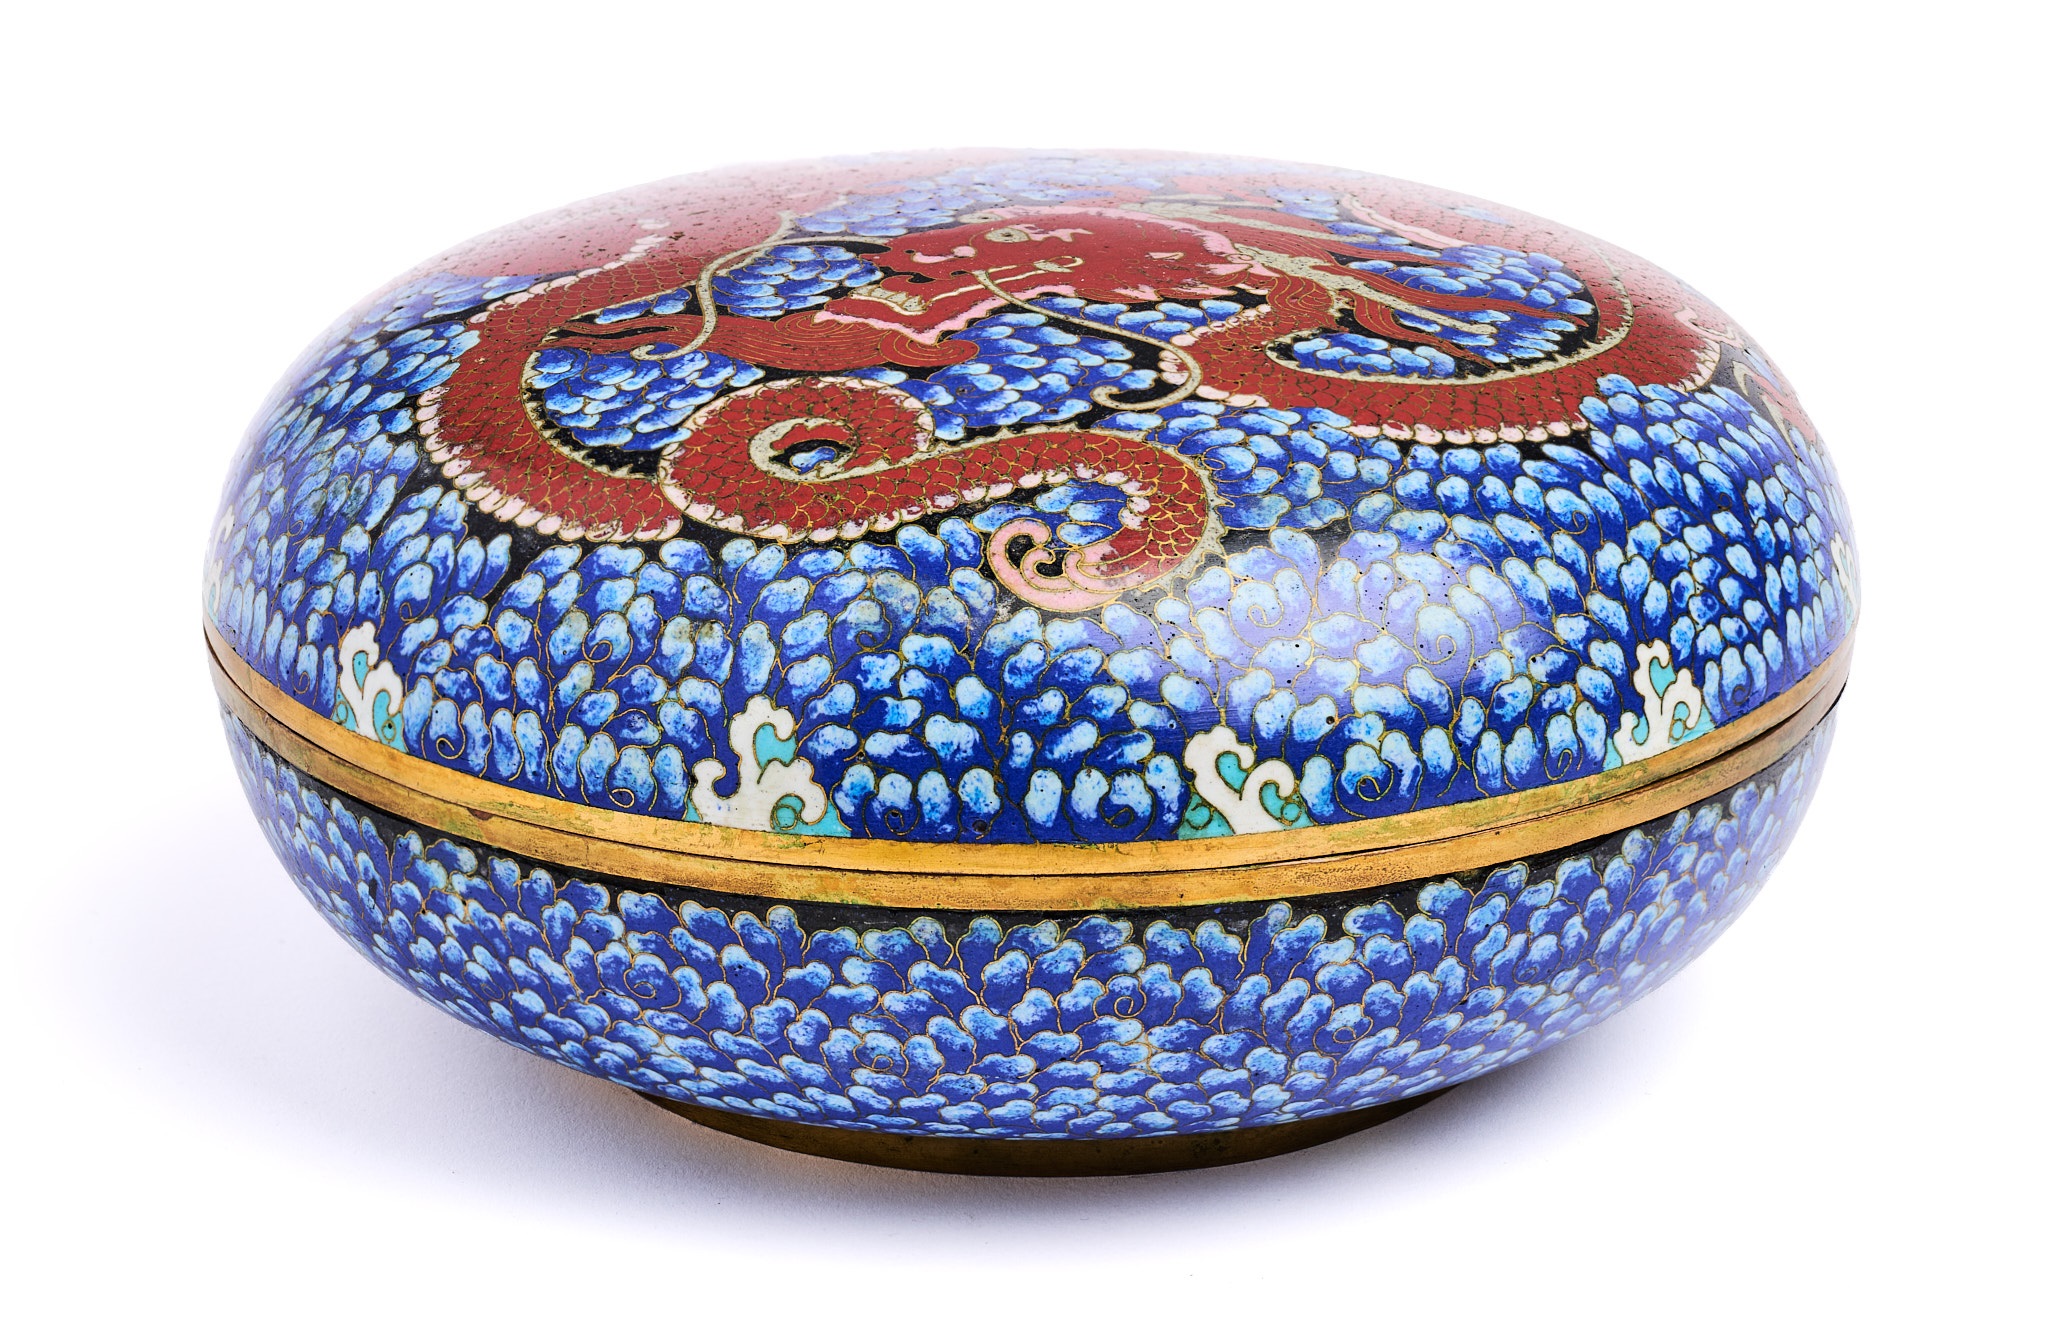 A CHINESE CLOISONNE ENAMEL 'DRAGON' BOX AND COVER, QING DYNASTY, CIRCA 1800 - Image 2 of 2